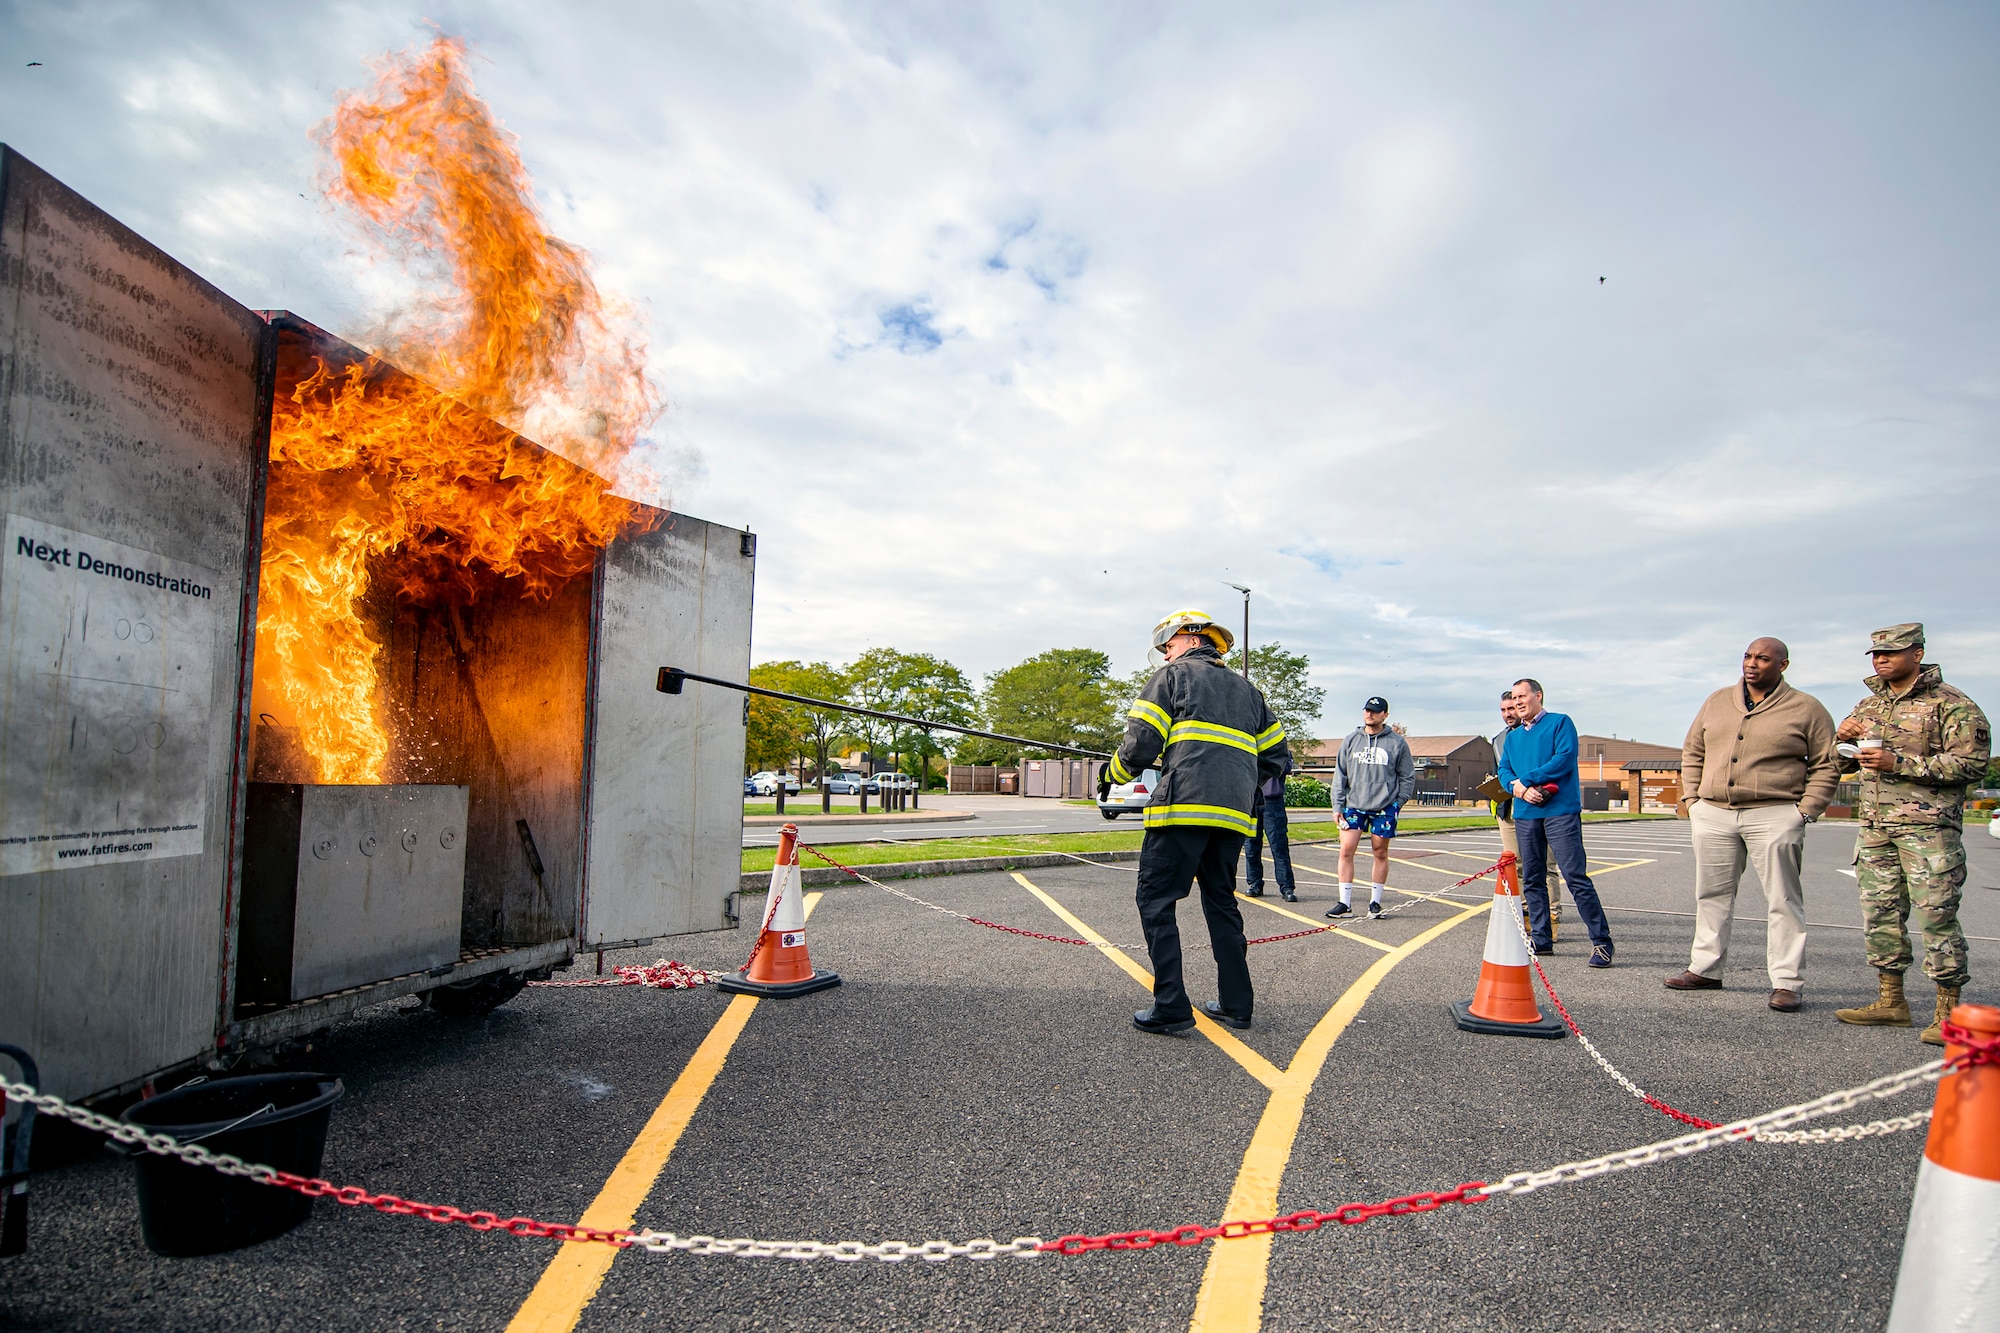 Dave Herman, 423d Civil Engineer Squadron assistant chief of fire prevention, demonstrates the dangers of a grease fire during a safety briefing at RAF Alconbury, England, Oct. 12, 2022.The demonstration was part of Fire Prevention Week in which firefighters from the 423d CES educated Airmen and dependents on proper fire safety habits. (U.S. Air Force photo by Staff Sgt. Eugene Oliver)